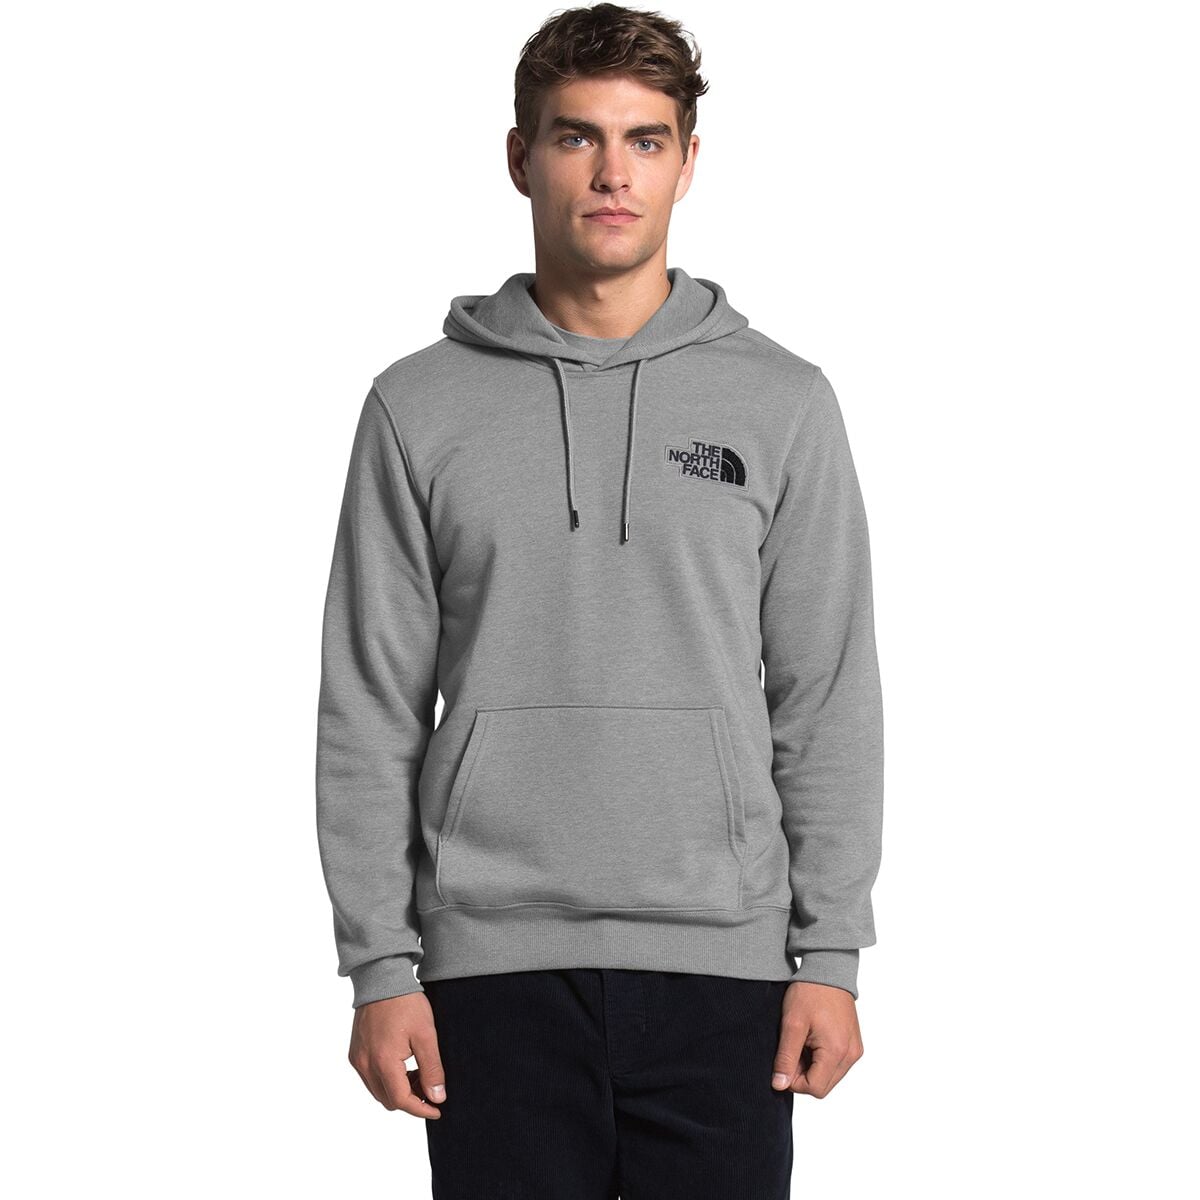 The North Face Patch Pullover Hoodie - Men's | Backcountry.com